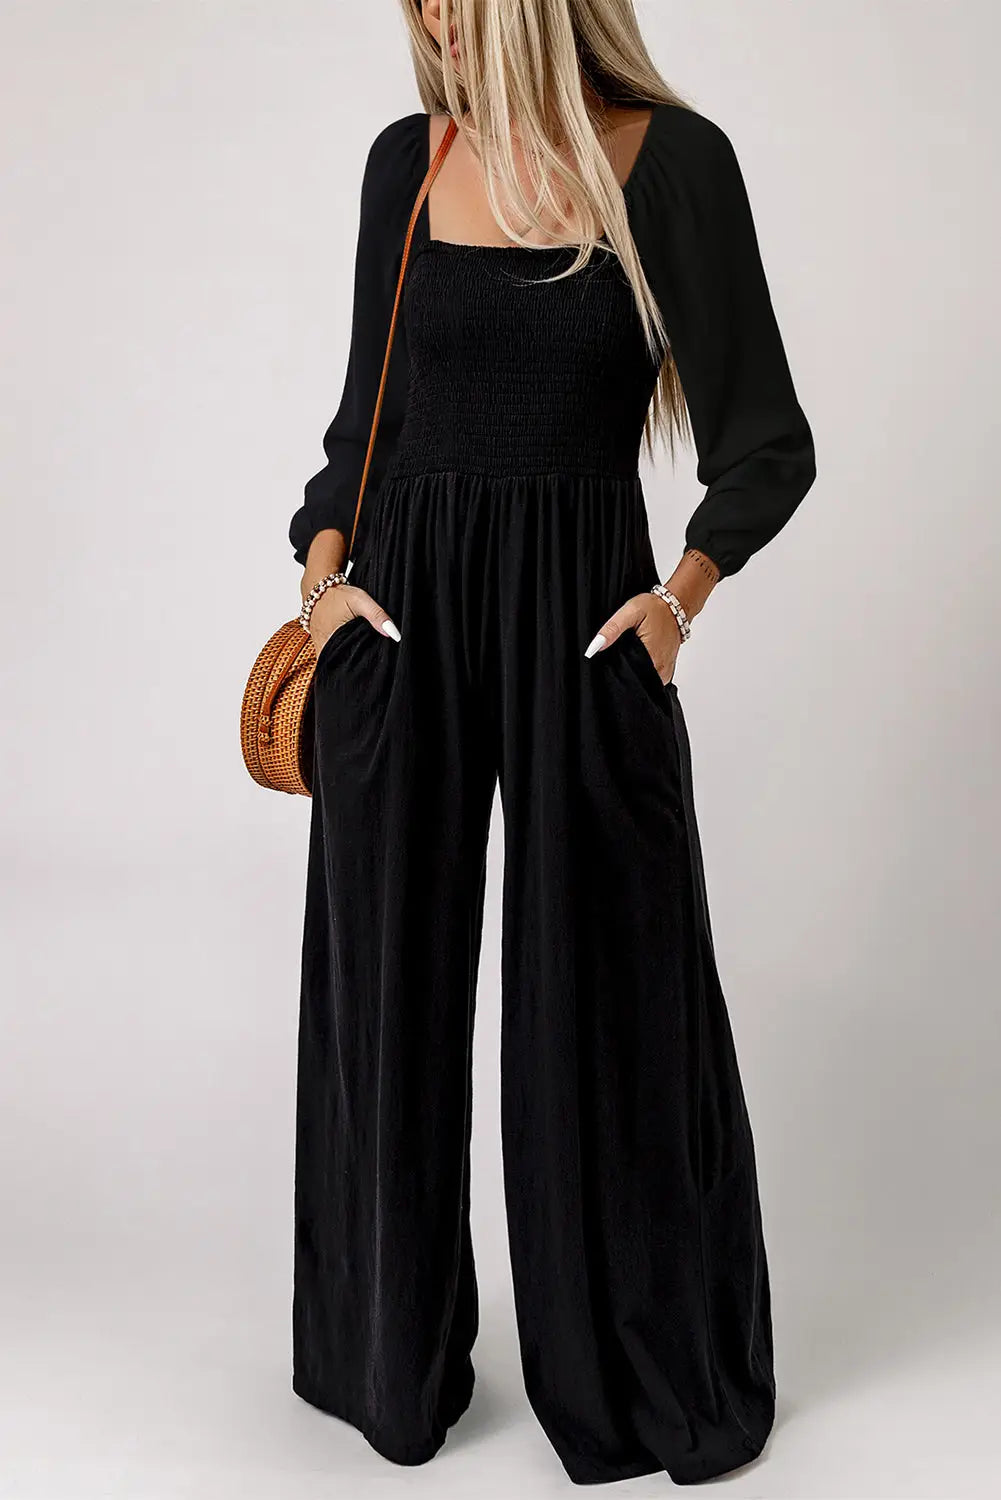 Black smocked square neck long sleeve wide leg jumpsuit - s / 100% polyester - jumpsuits & rompers